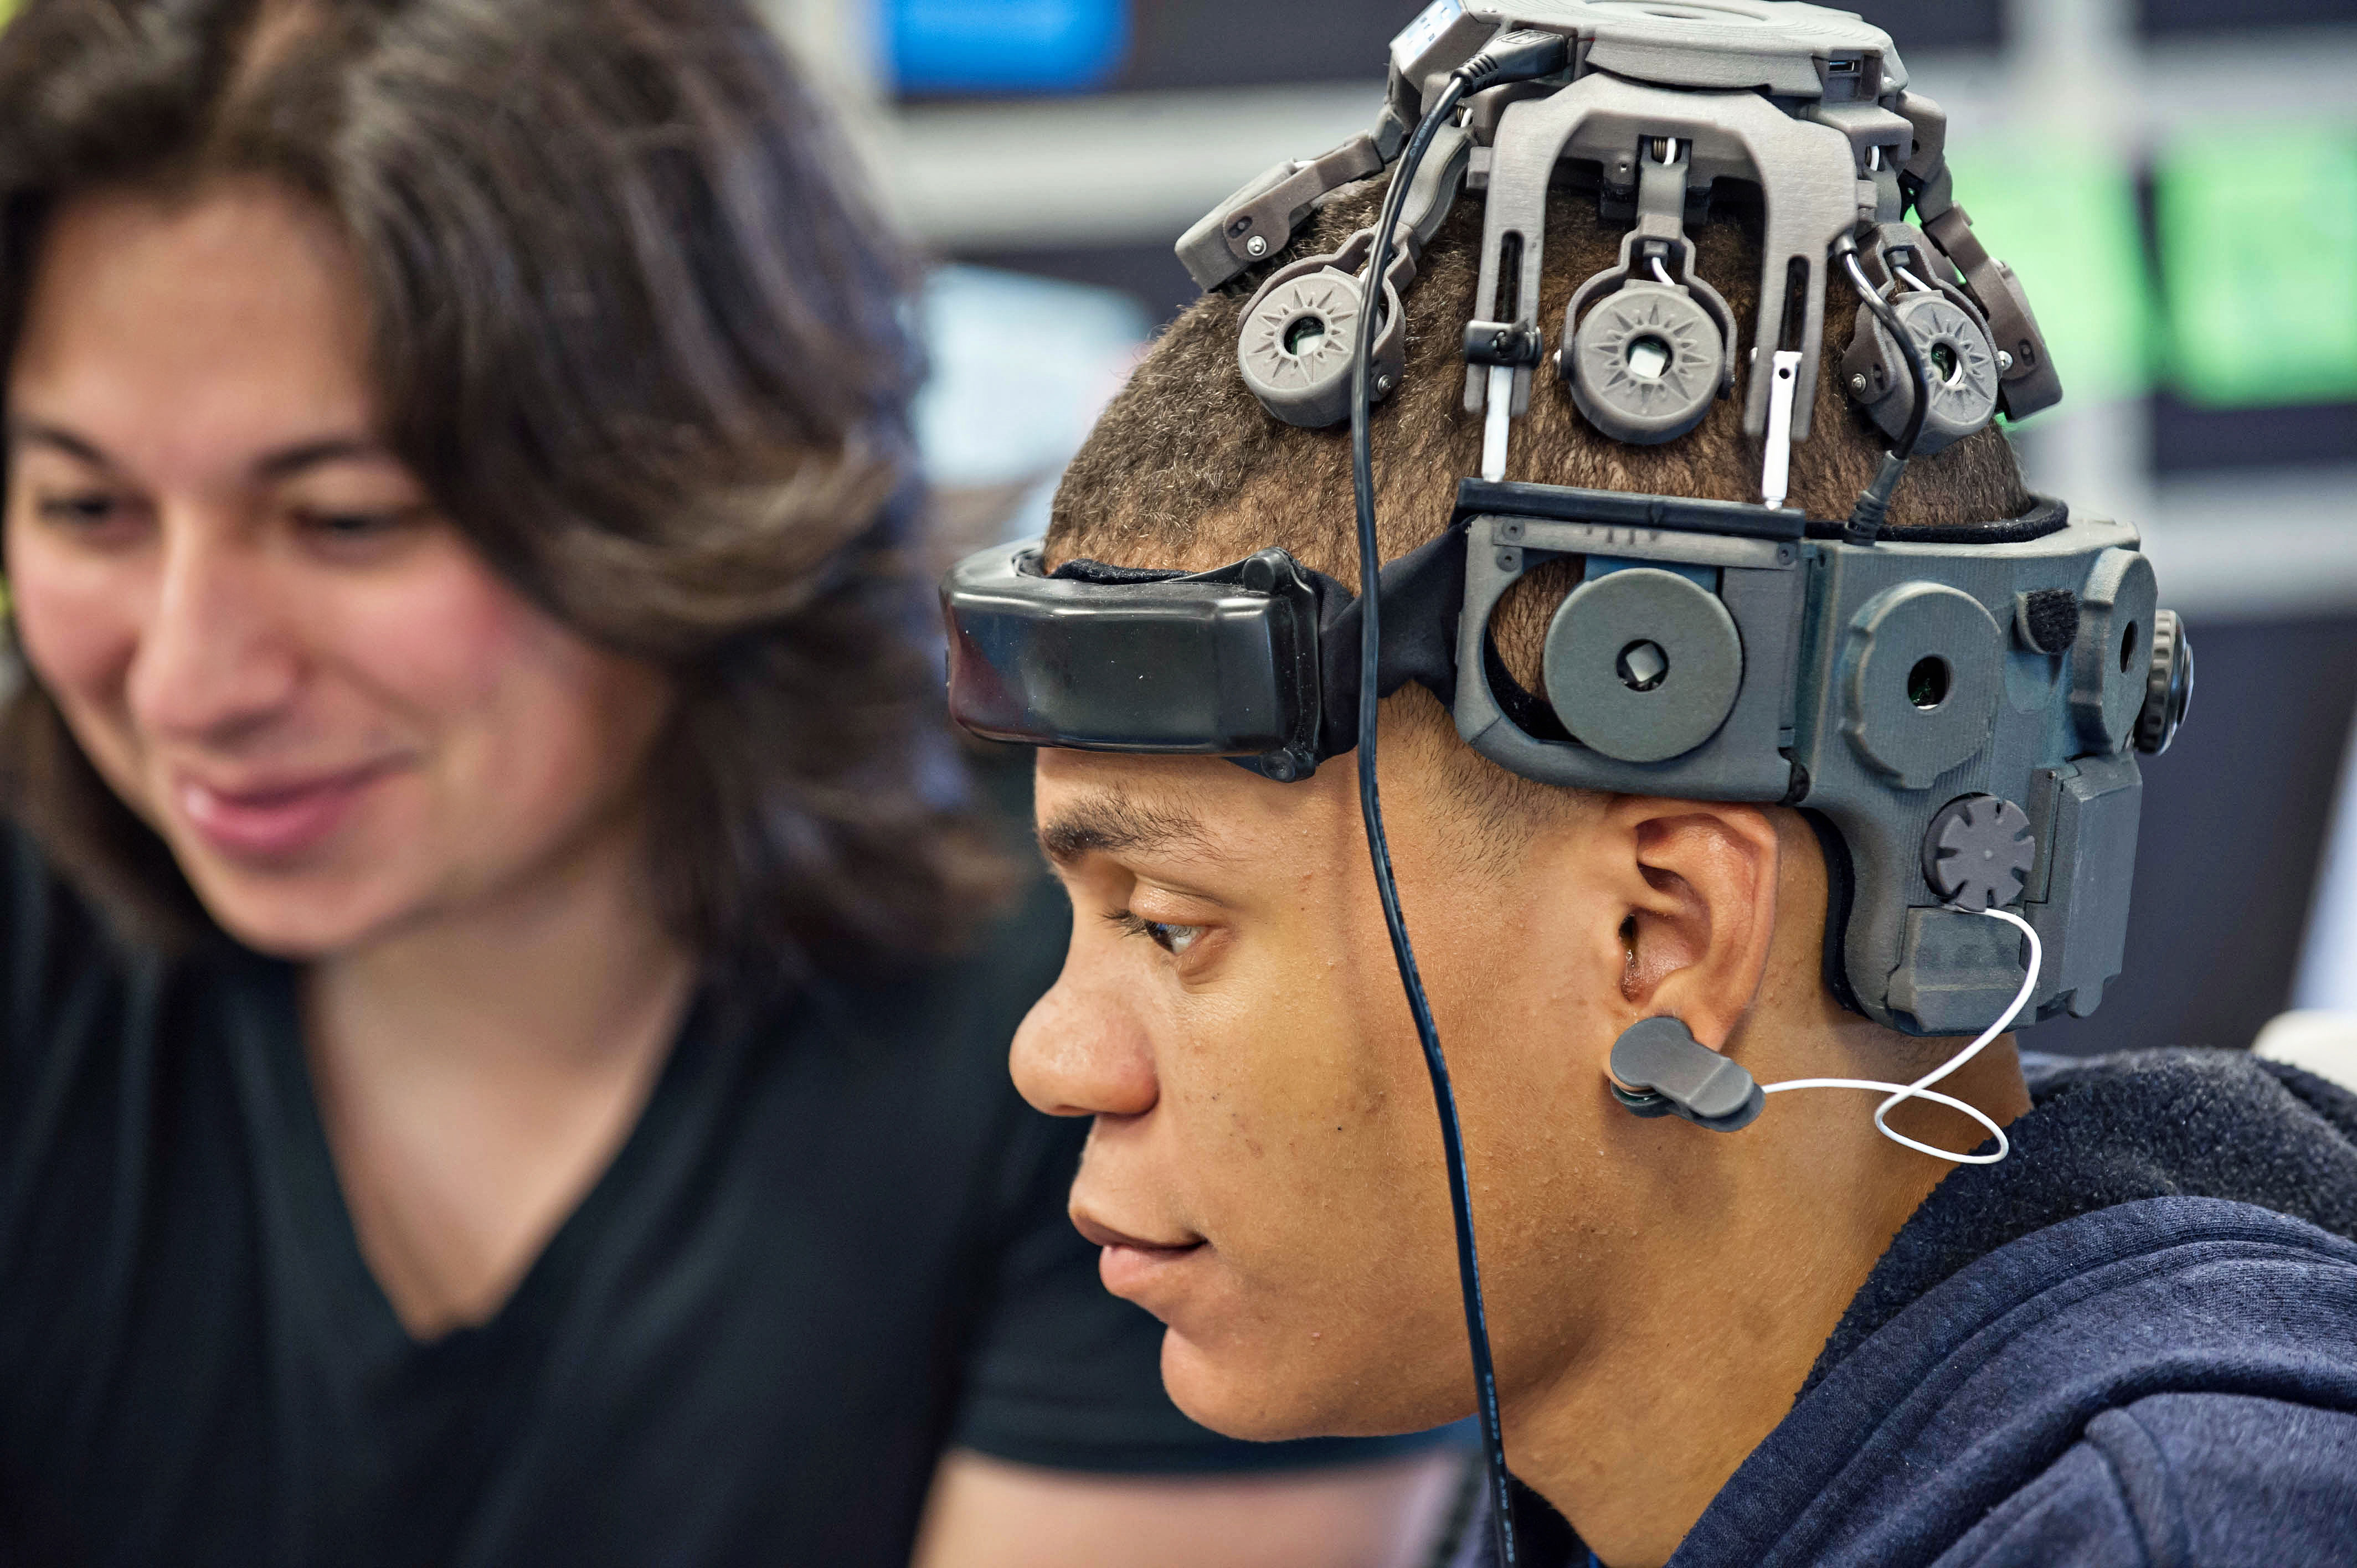 A prototype version of Neurable's brain-computer interface technology includes a number of dry electrodes placed on the scalp.